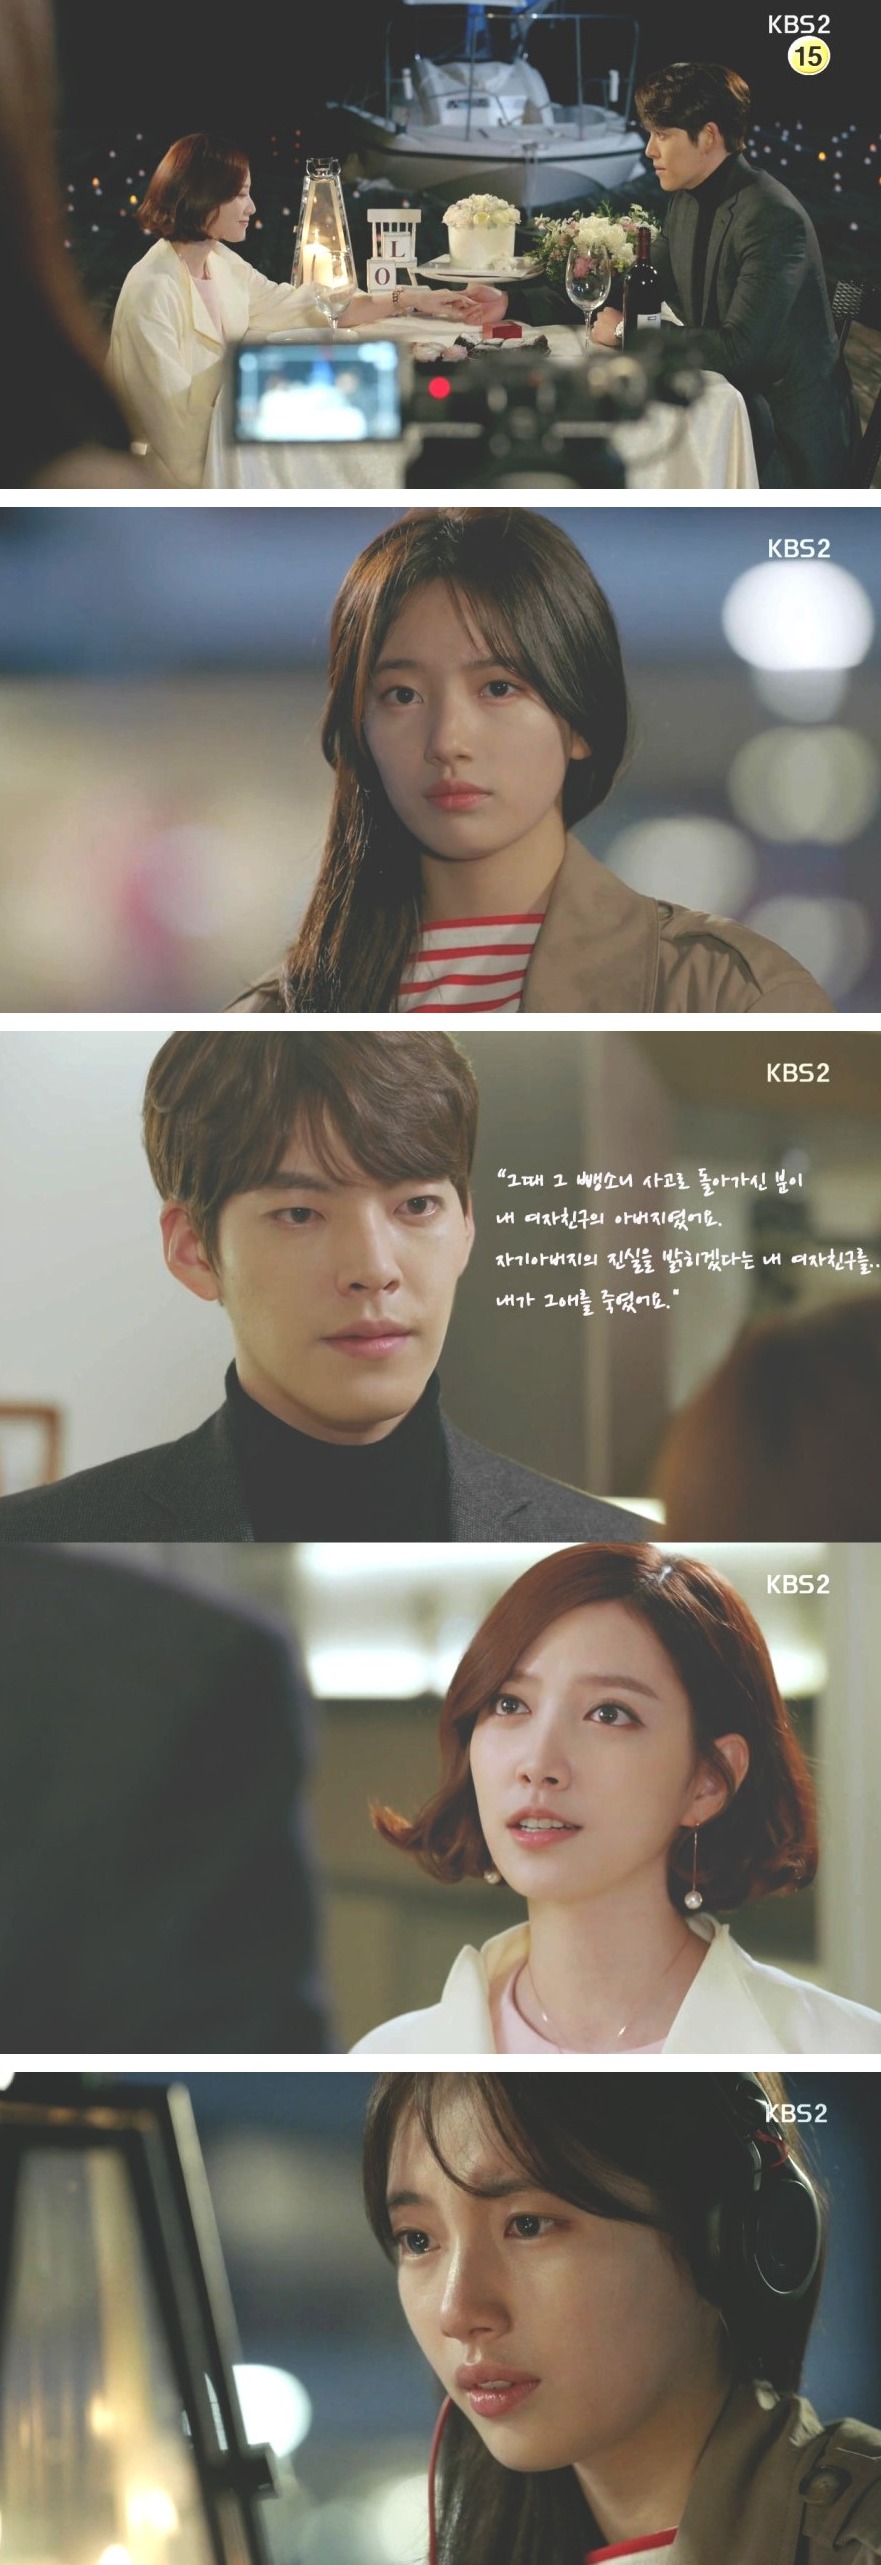 Uncontrollably Fond Poster Wallpapers